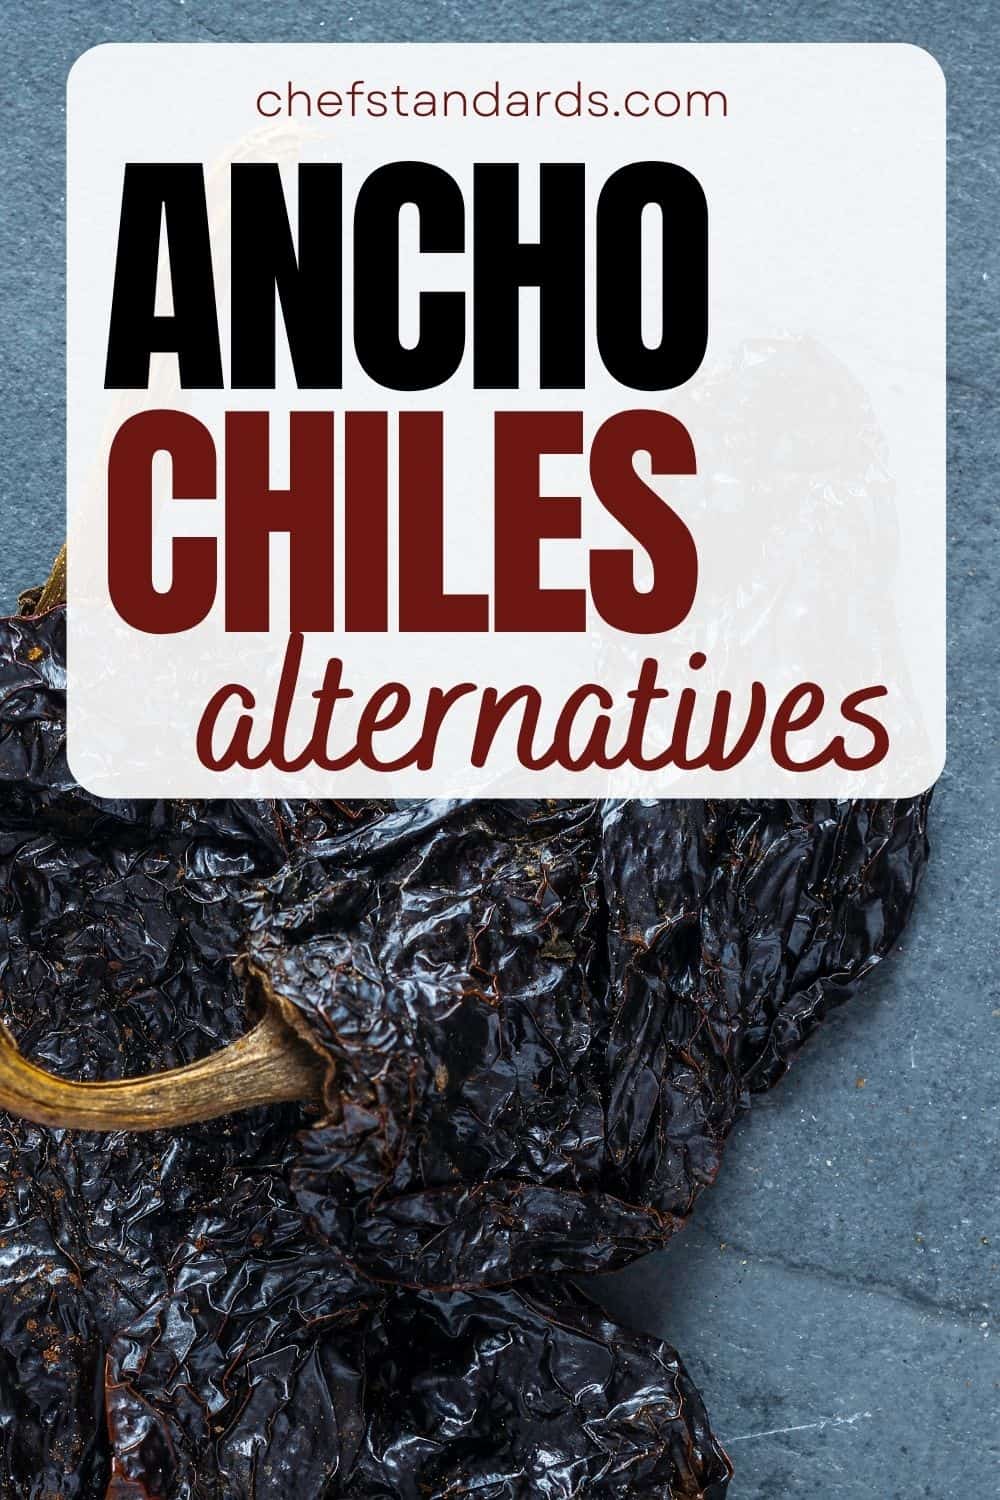 Finding The Best Substitute For Ancho Chiles 15 Options